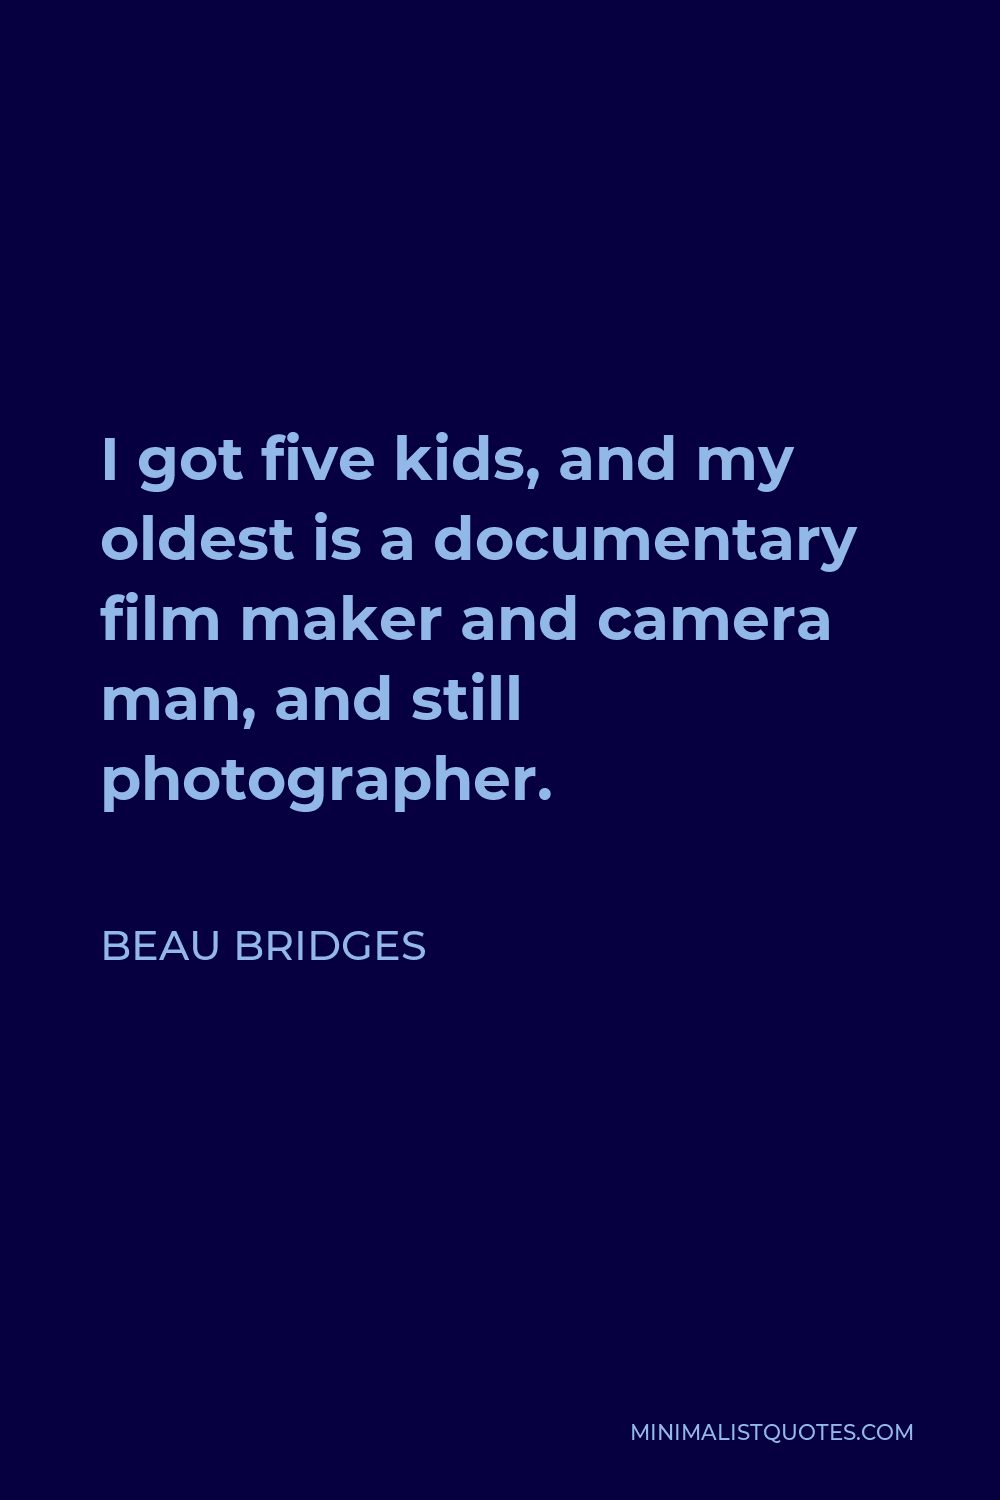 Beau Bridges Quote - I got five kids, and my oldest is a documentary film maker and camera man, and still photographer.